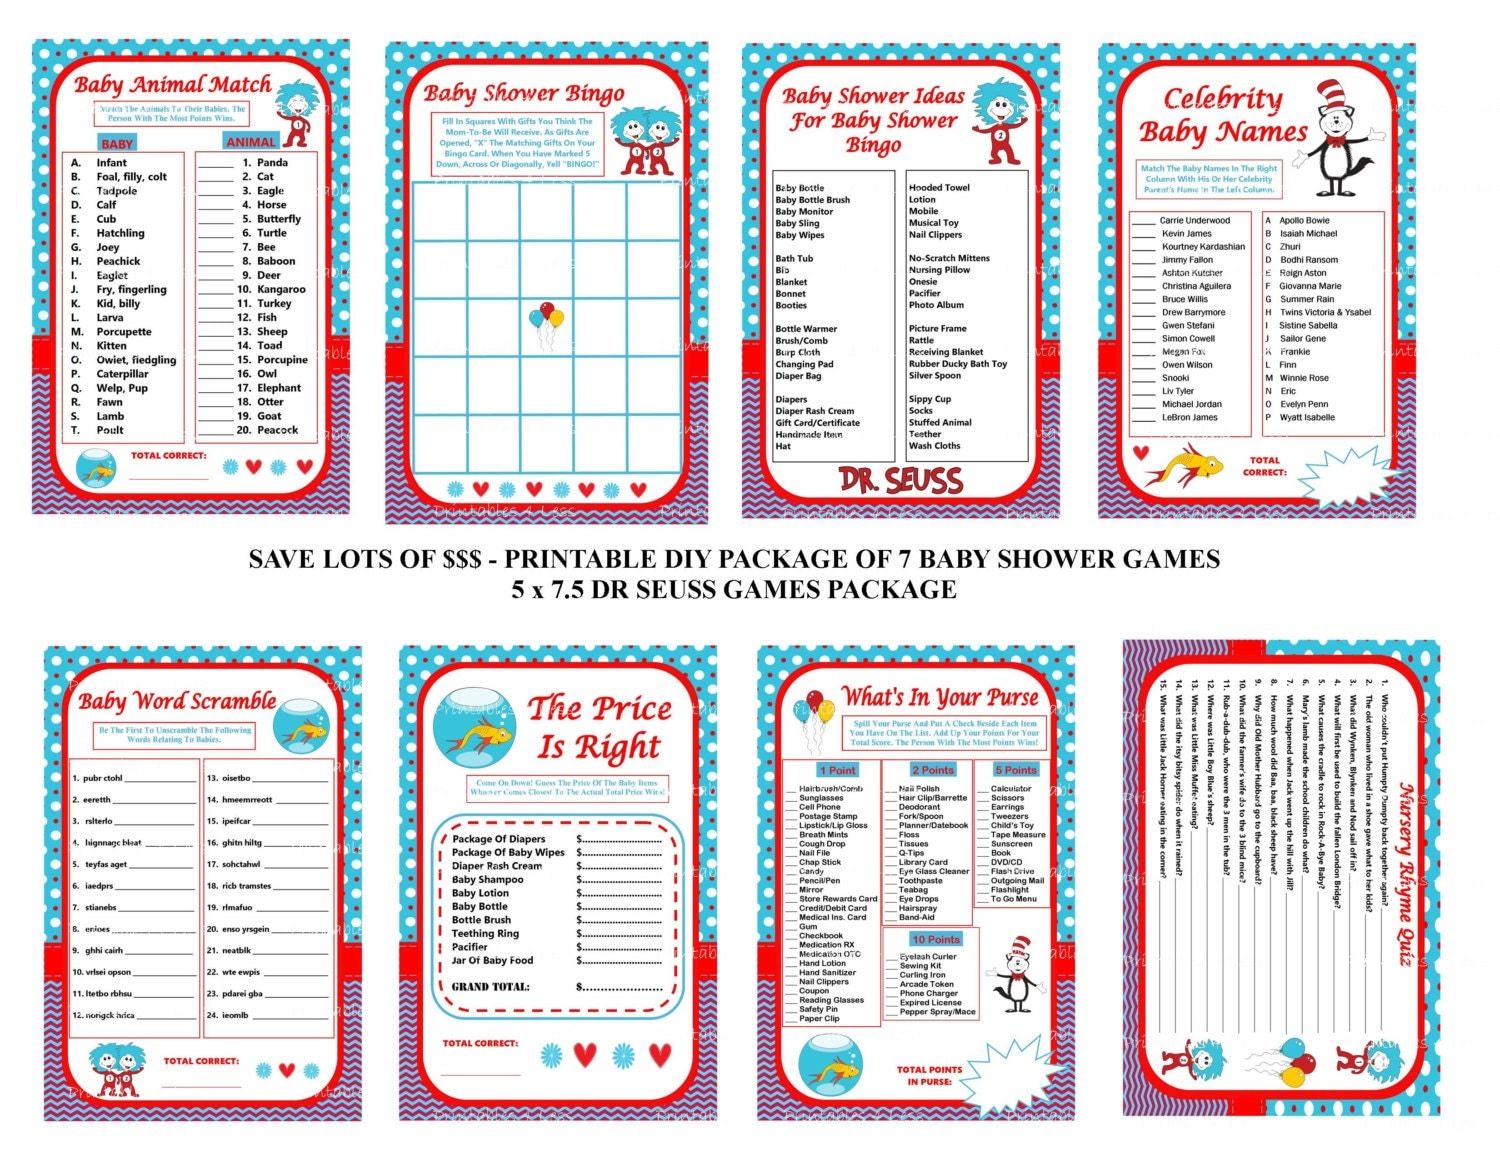 5x7-dr-seuss-baby-shower-game-printable-seuss-games-cat-in